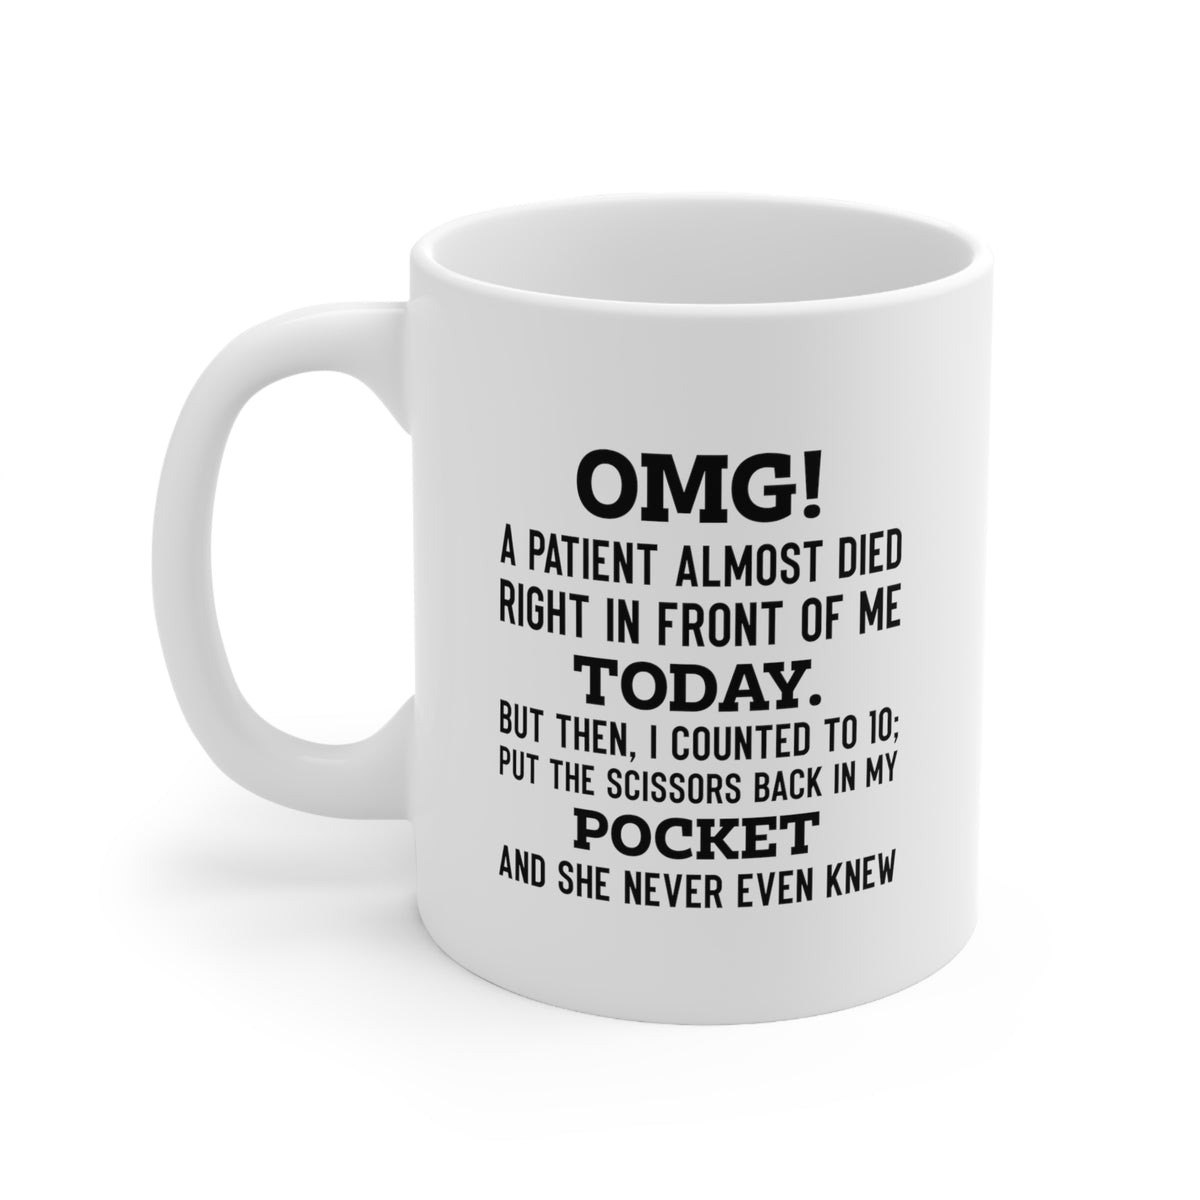 Funny Nurse Coffee Mug - A patient almost died Cup - Fun Christmas Gifts for Retirement Nursing Women